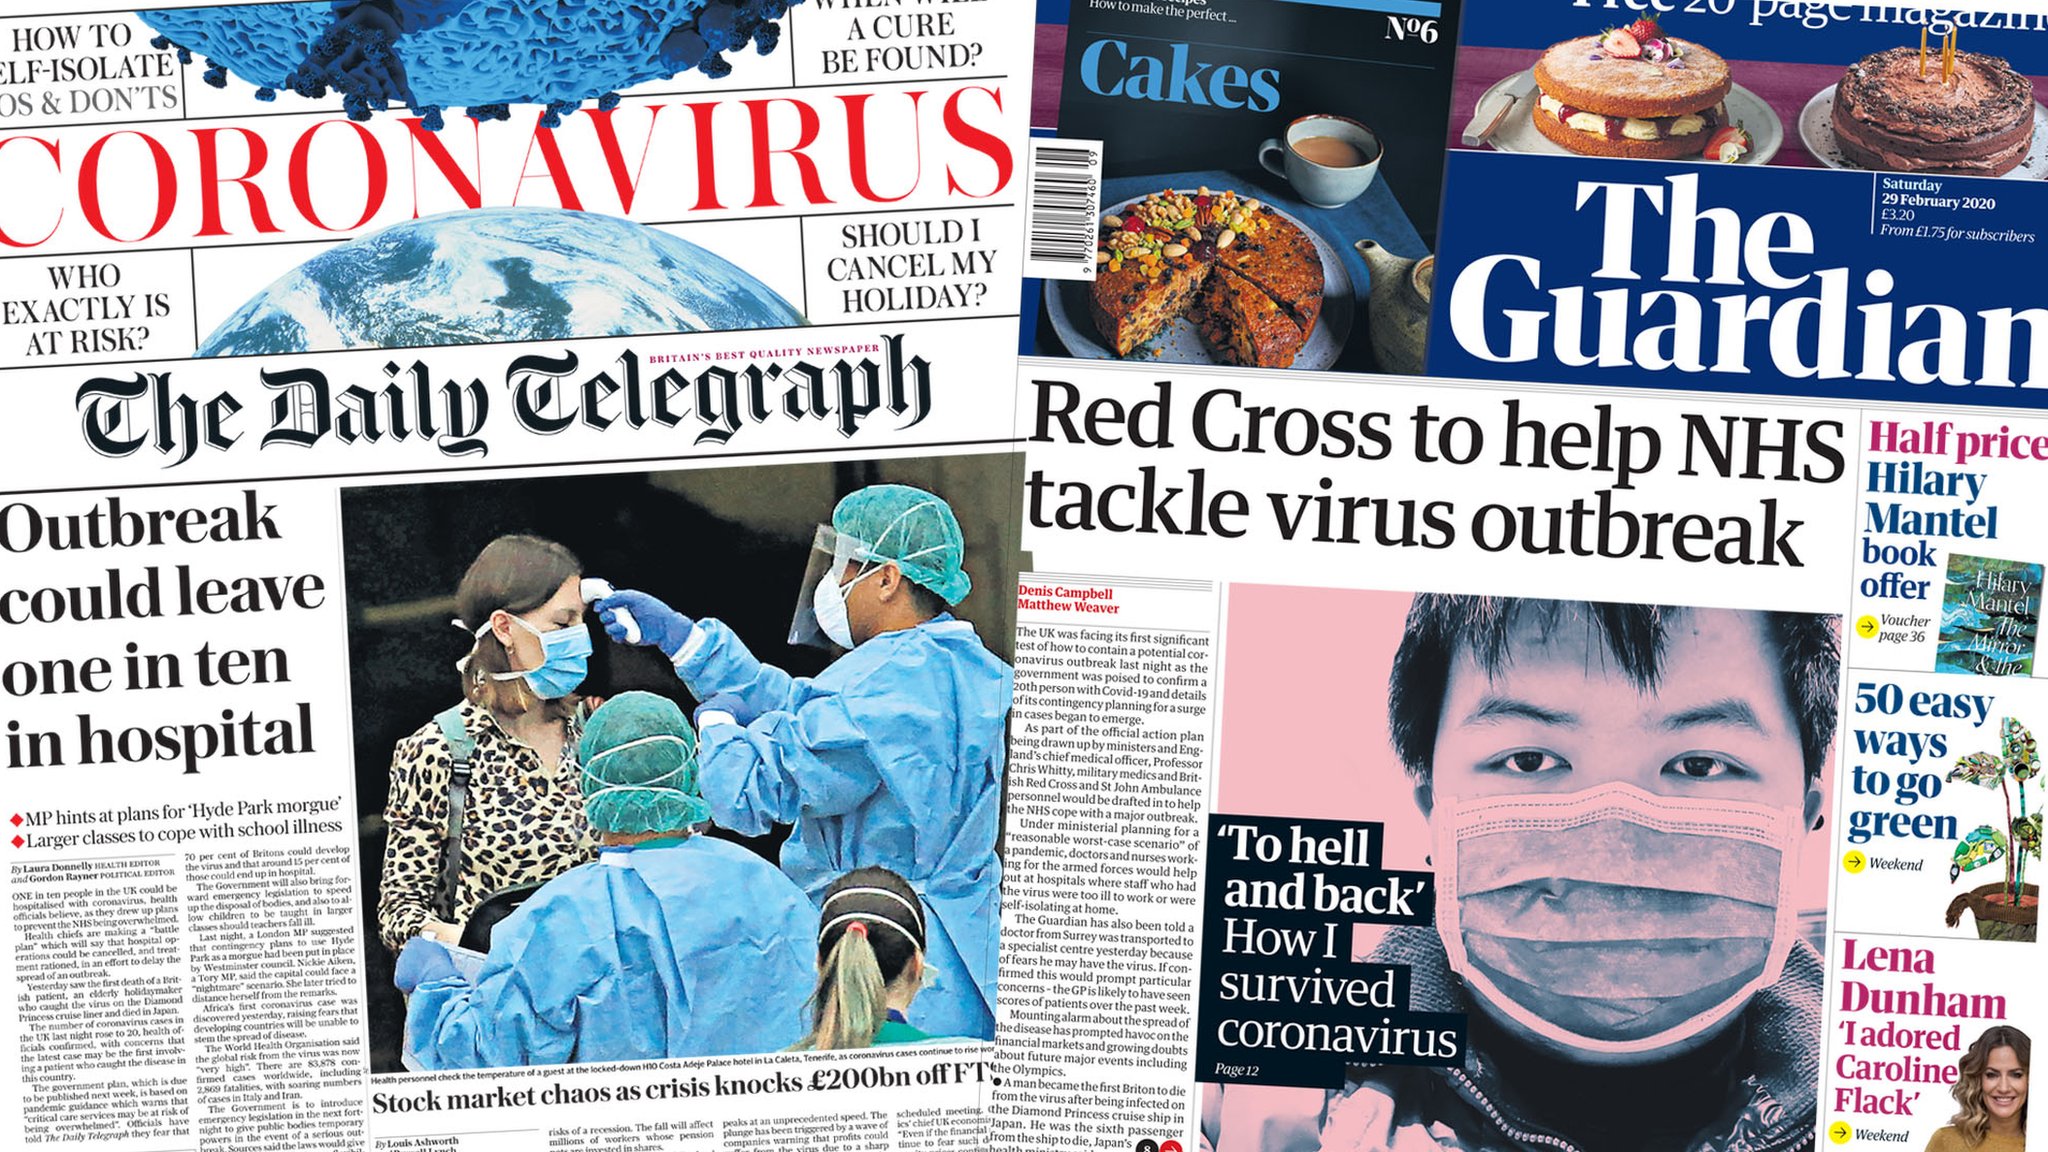 Newspaper Headlines War On Virus With Emergency Laws And Battle Plan c News